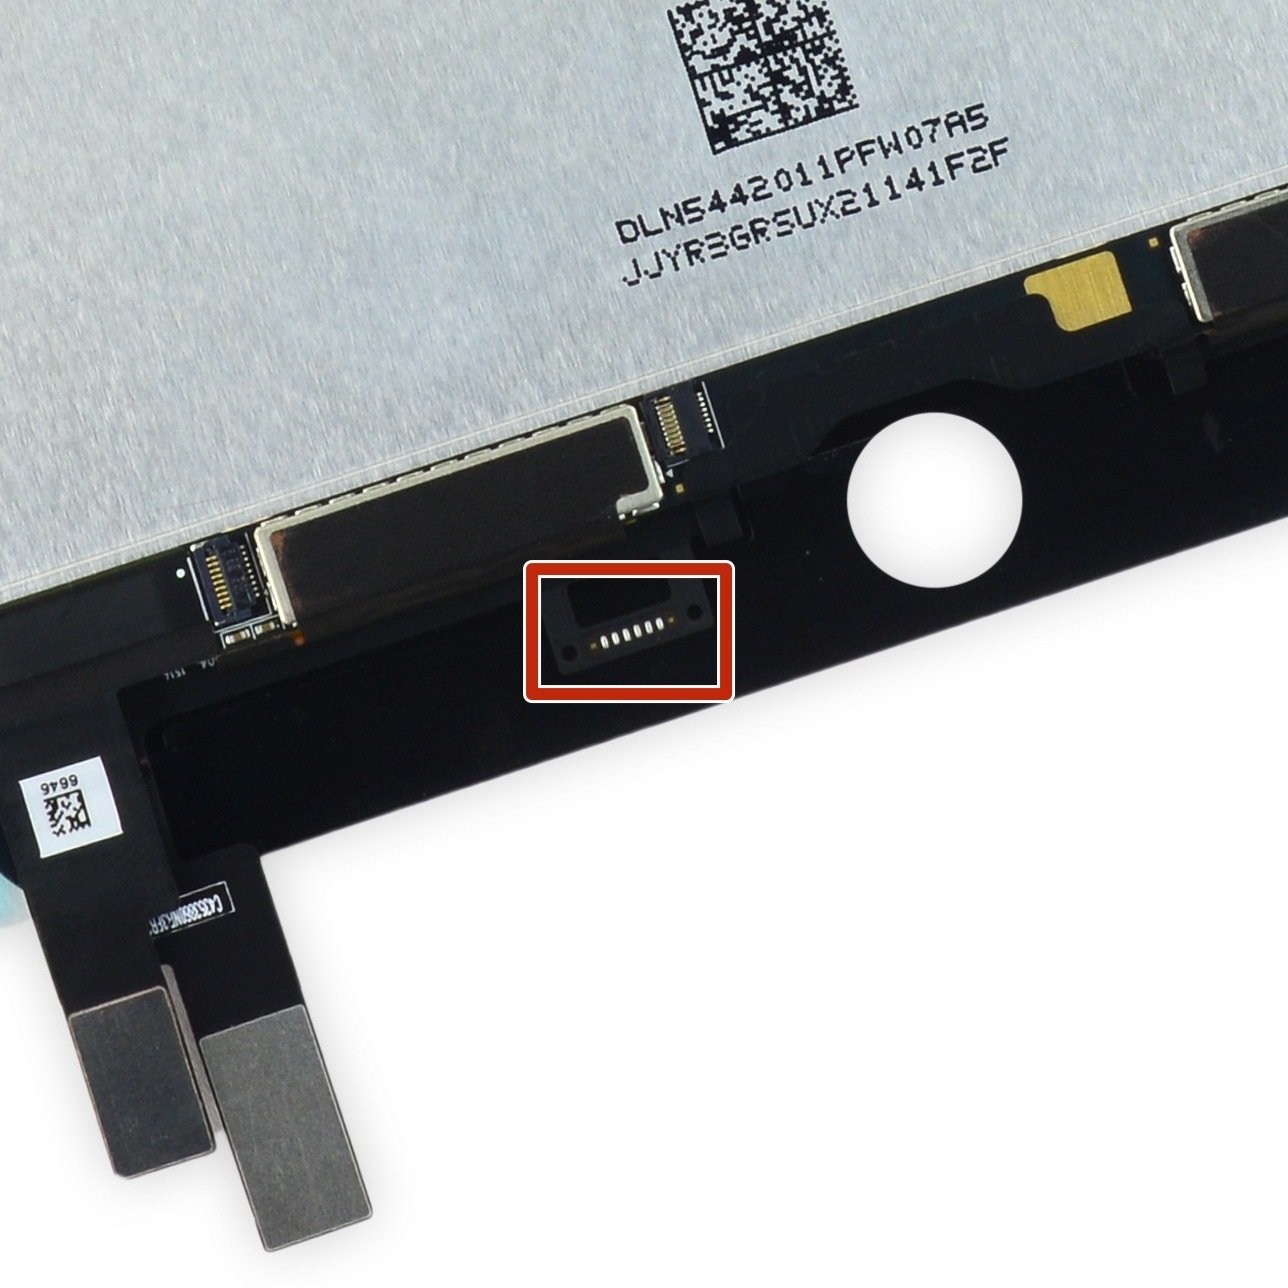 iPad mini 4 A1538 Screen: LCD and Digitizer Replacement Kit - iFixit